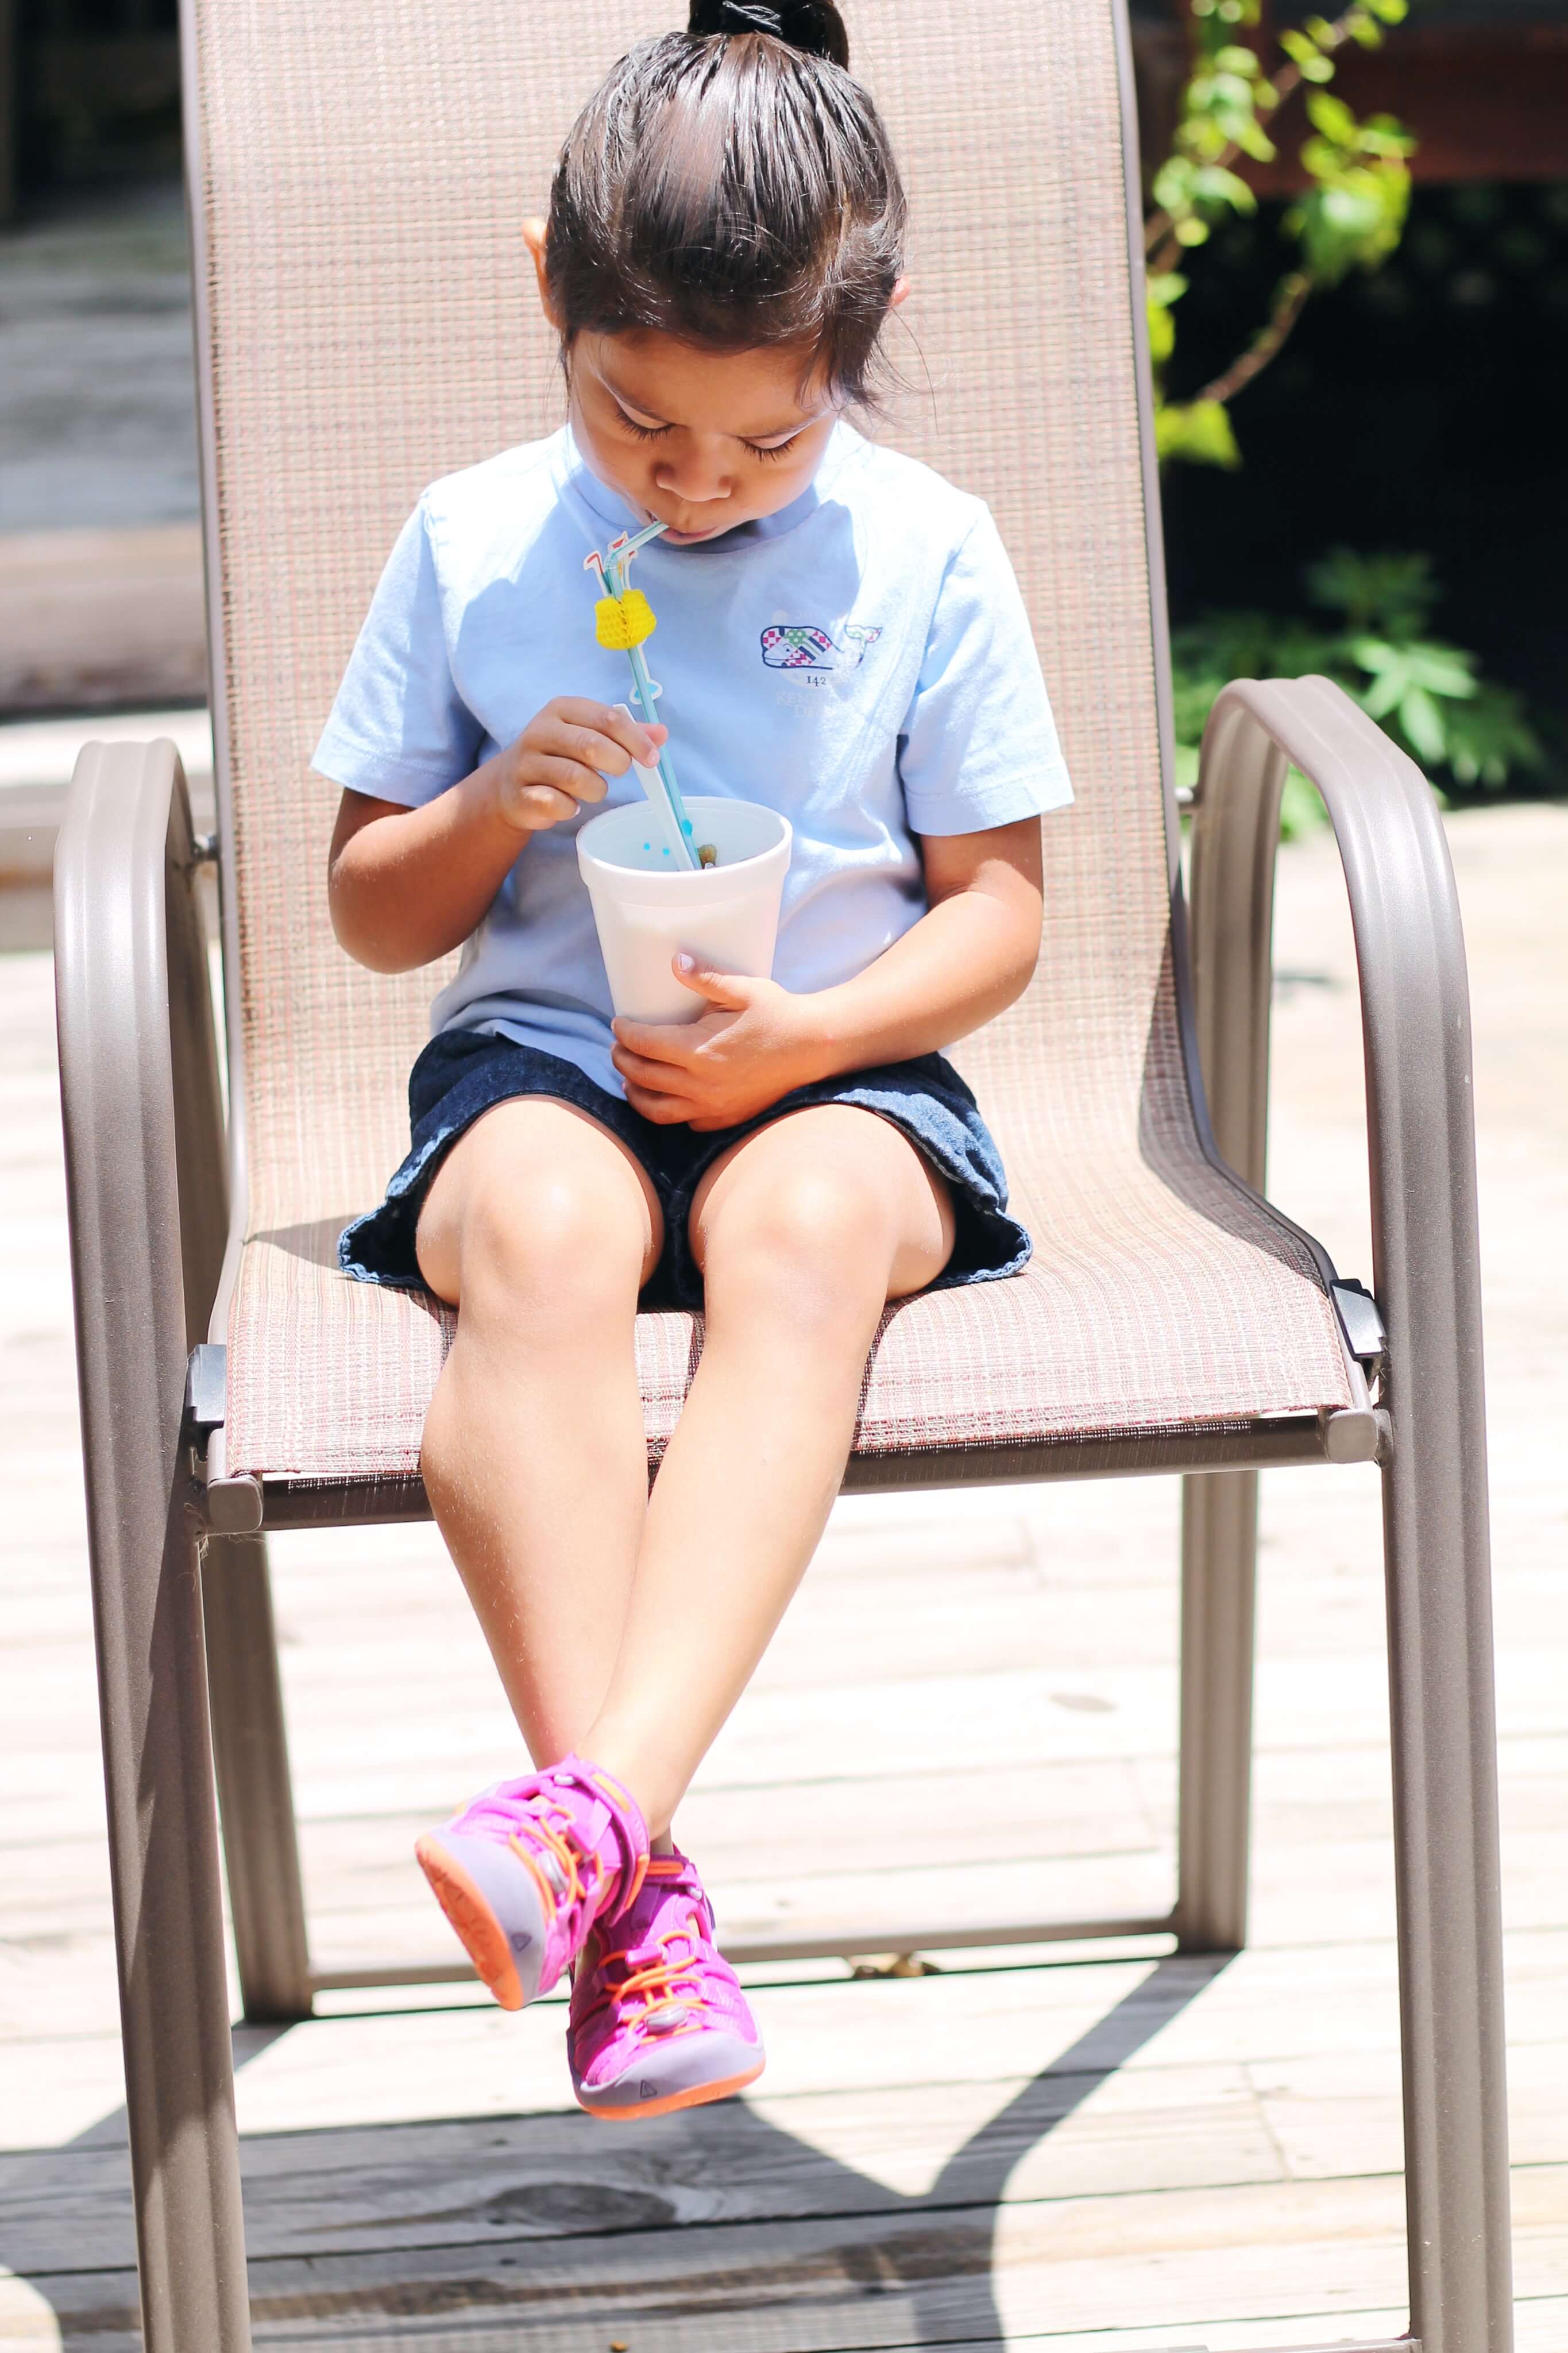 Keen Moxie sandals. The perfect summer shoe for kids!